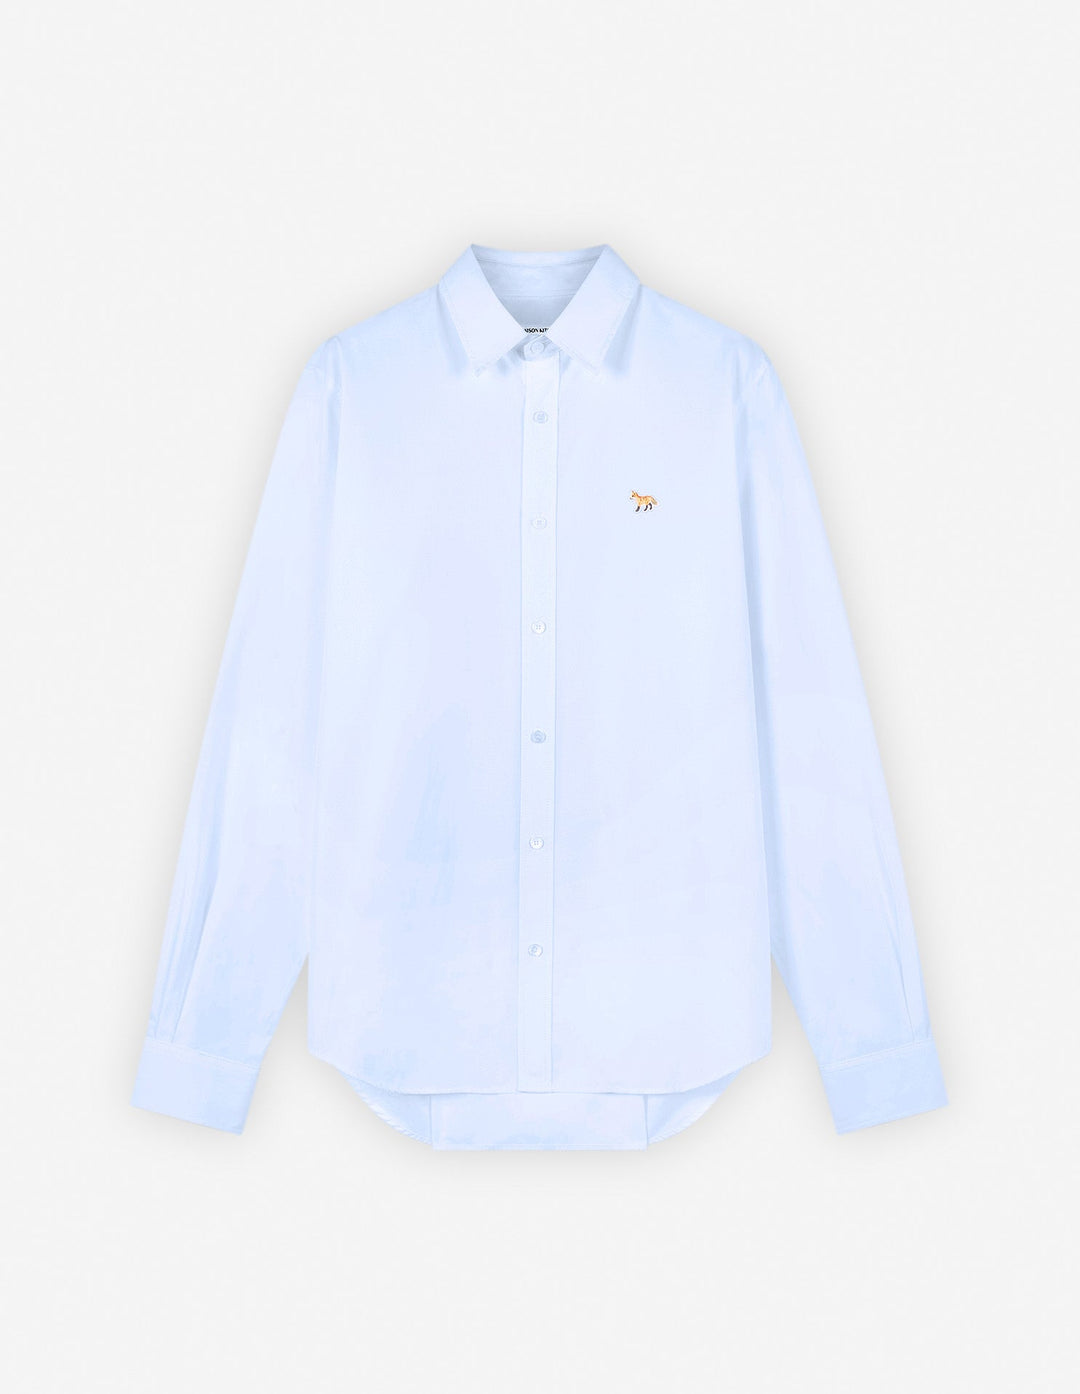 CLASSIC SHIRT WITH BABY FOX PATCH IN COTTON POPLIN